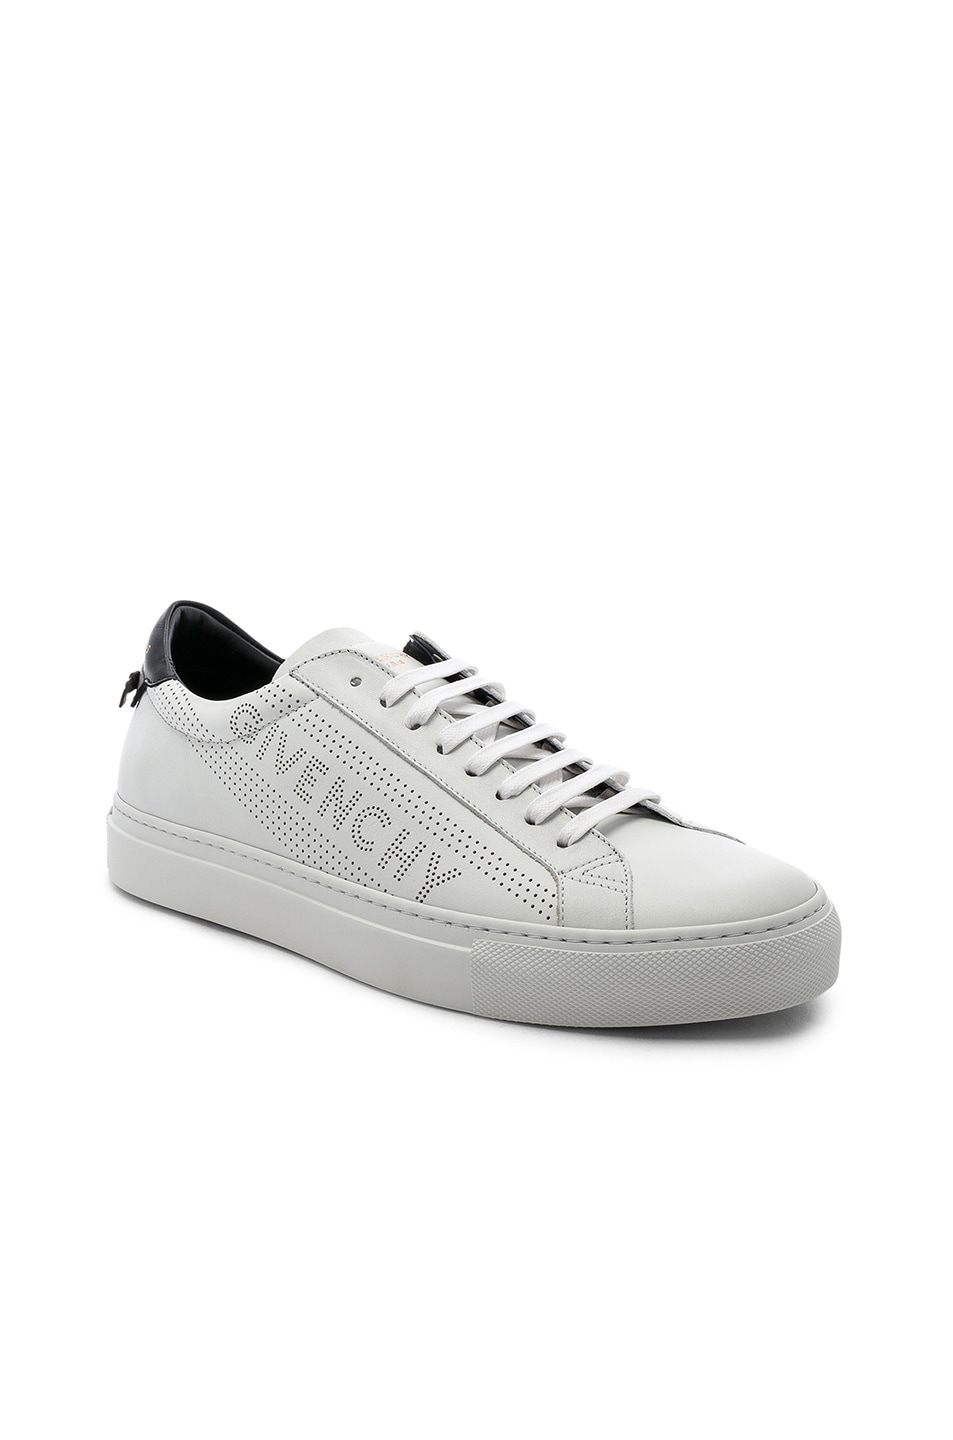 Image 1 of Givenchy Urban Street Perforated Sneakers in White & Black